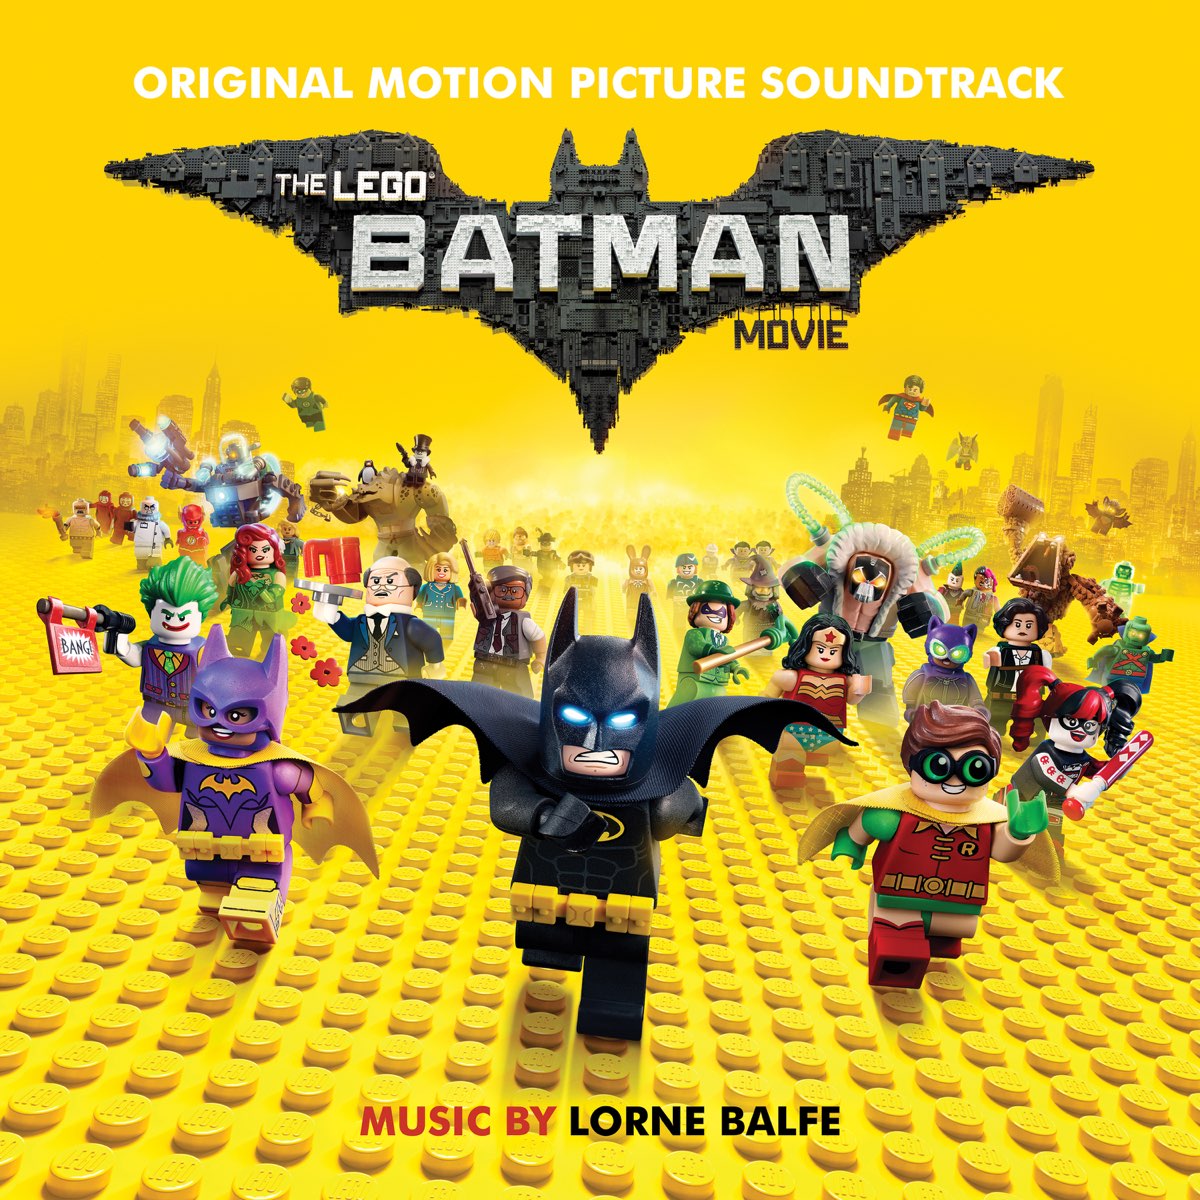 The Lego Batman Movie (Original Soundtrack) by Various Artists on Apple Music